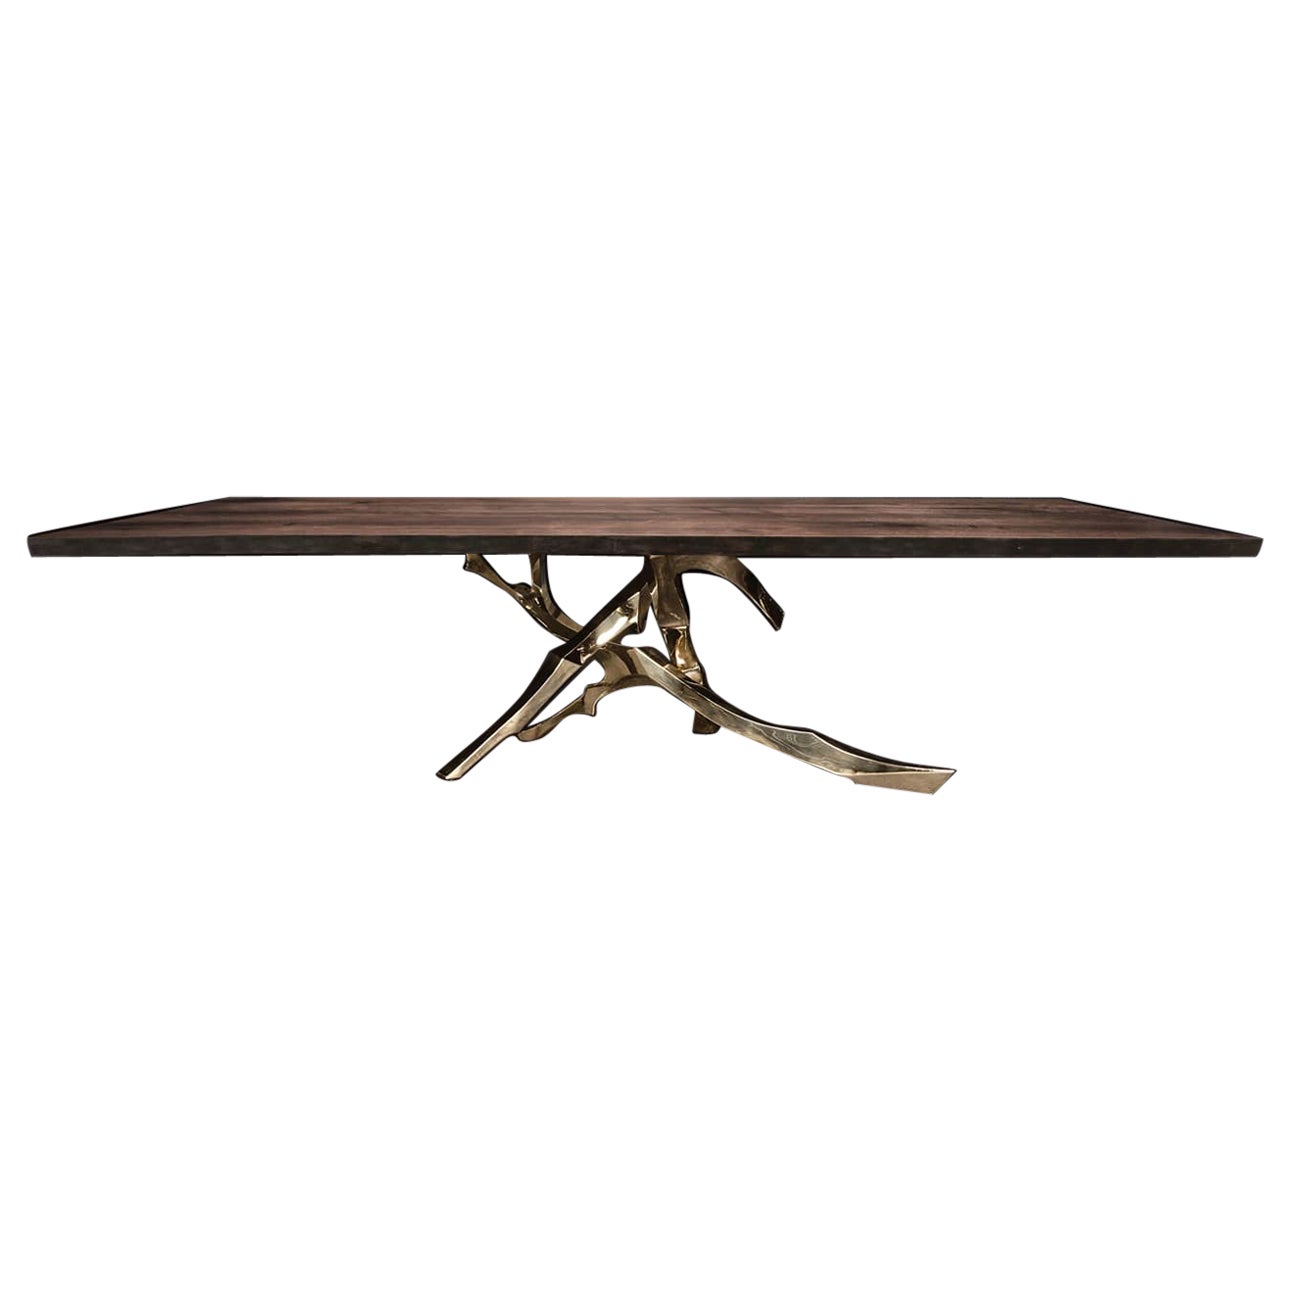 Grolier Table by Barlas Baylar 72'', Seamed For Sale